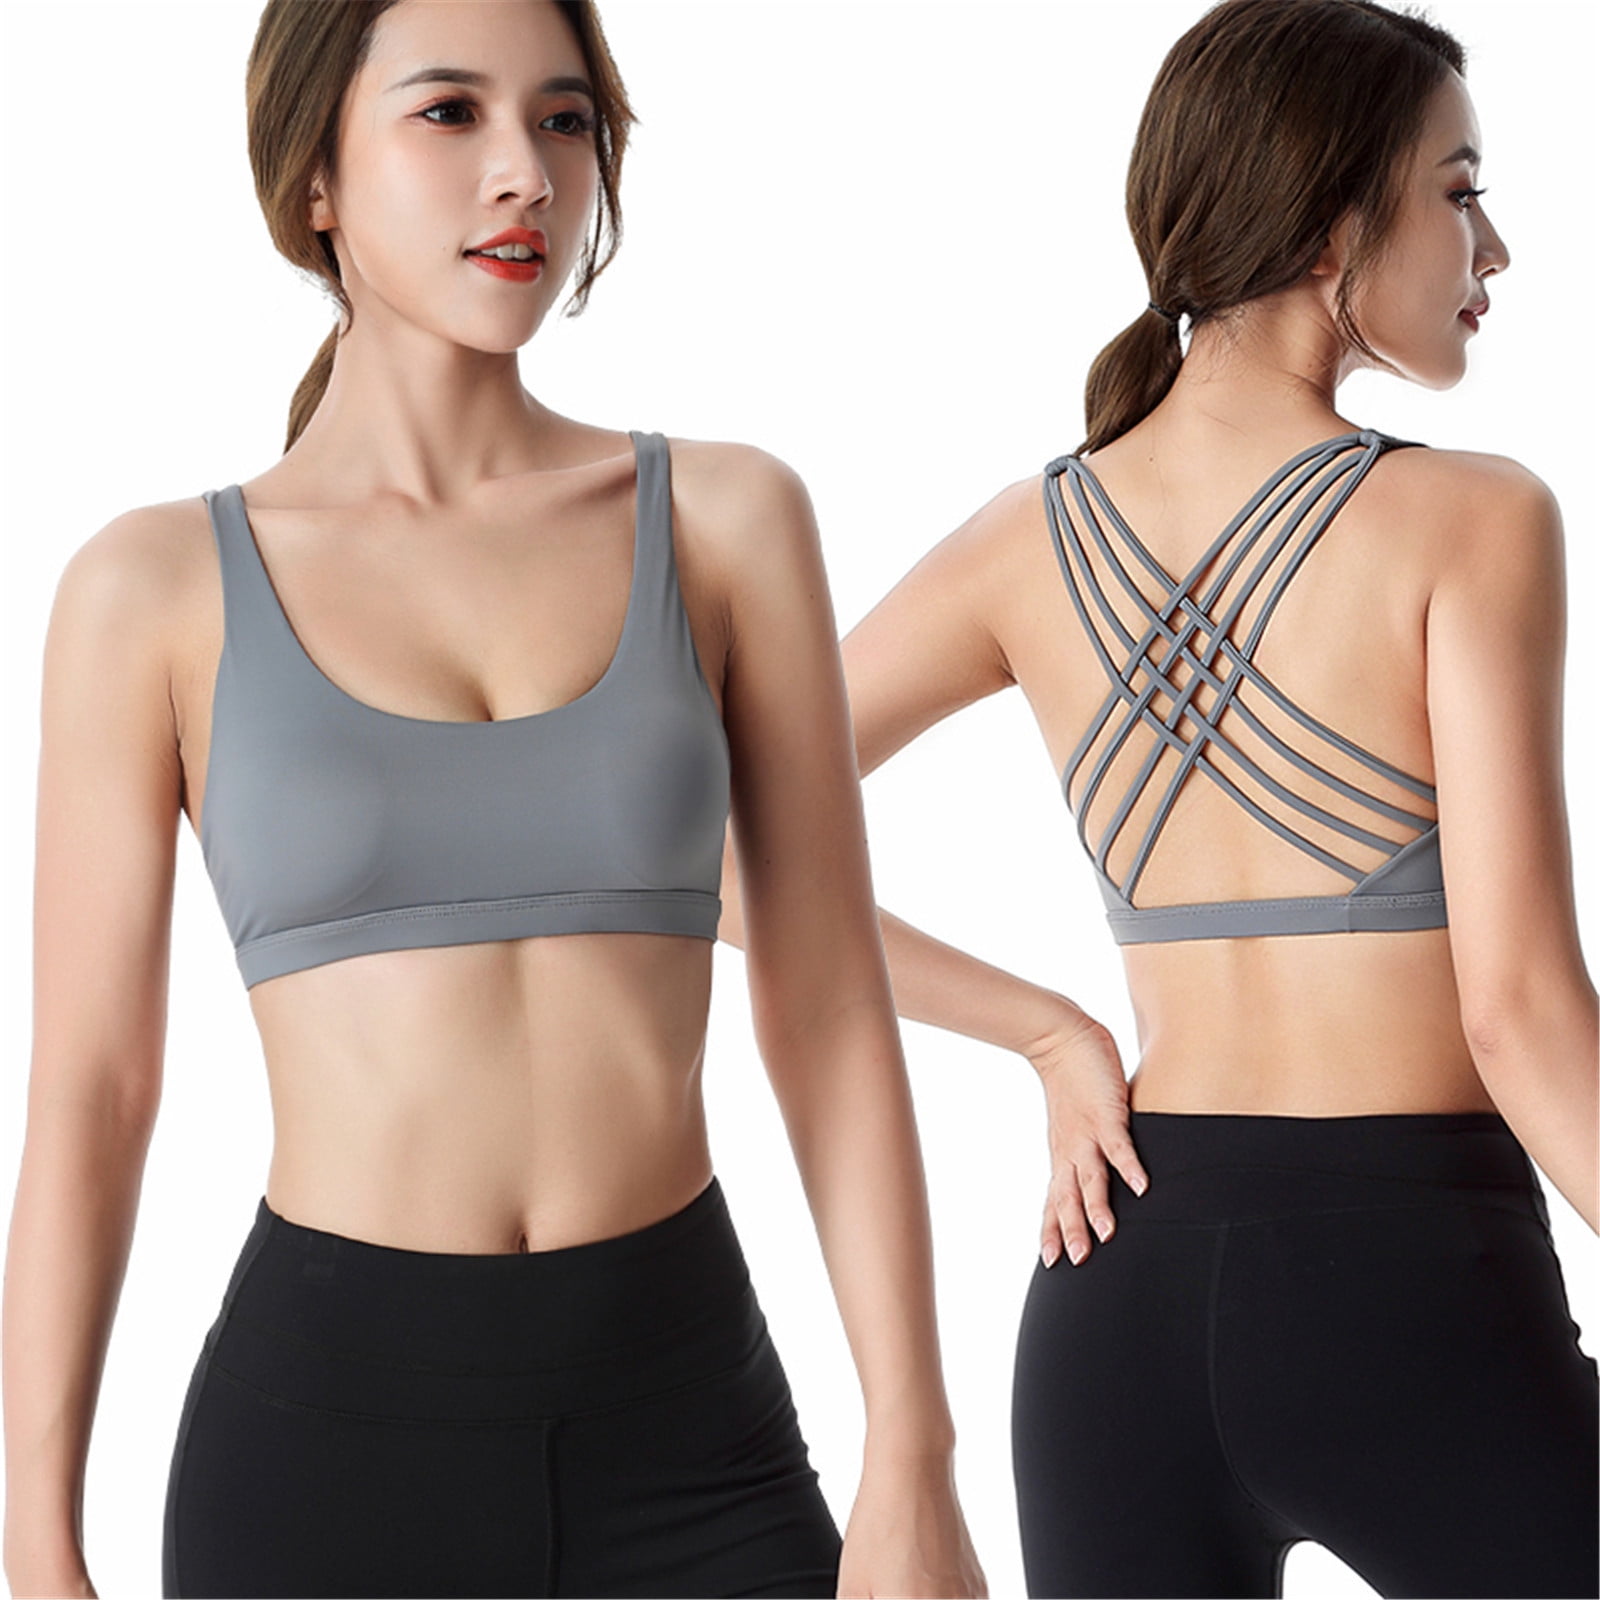 Spring Savings Clearance Items Home Deals! Zeceouar Sports Bras For Women  Woman Bras With String Quick Dry Shockproof Running Fitness Large Size  Underwear 